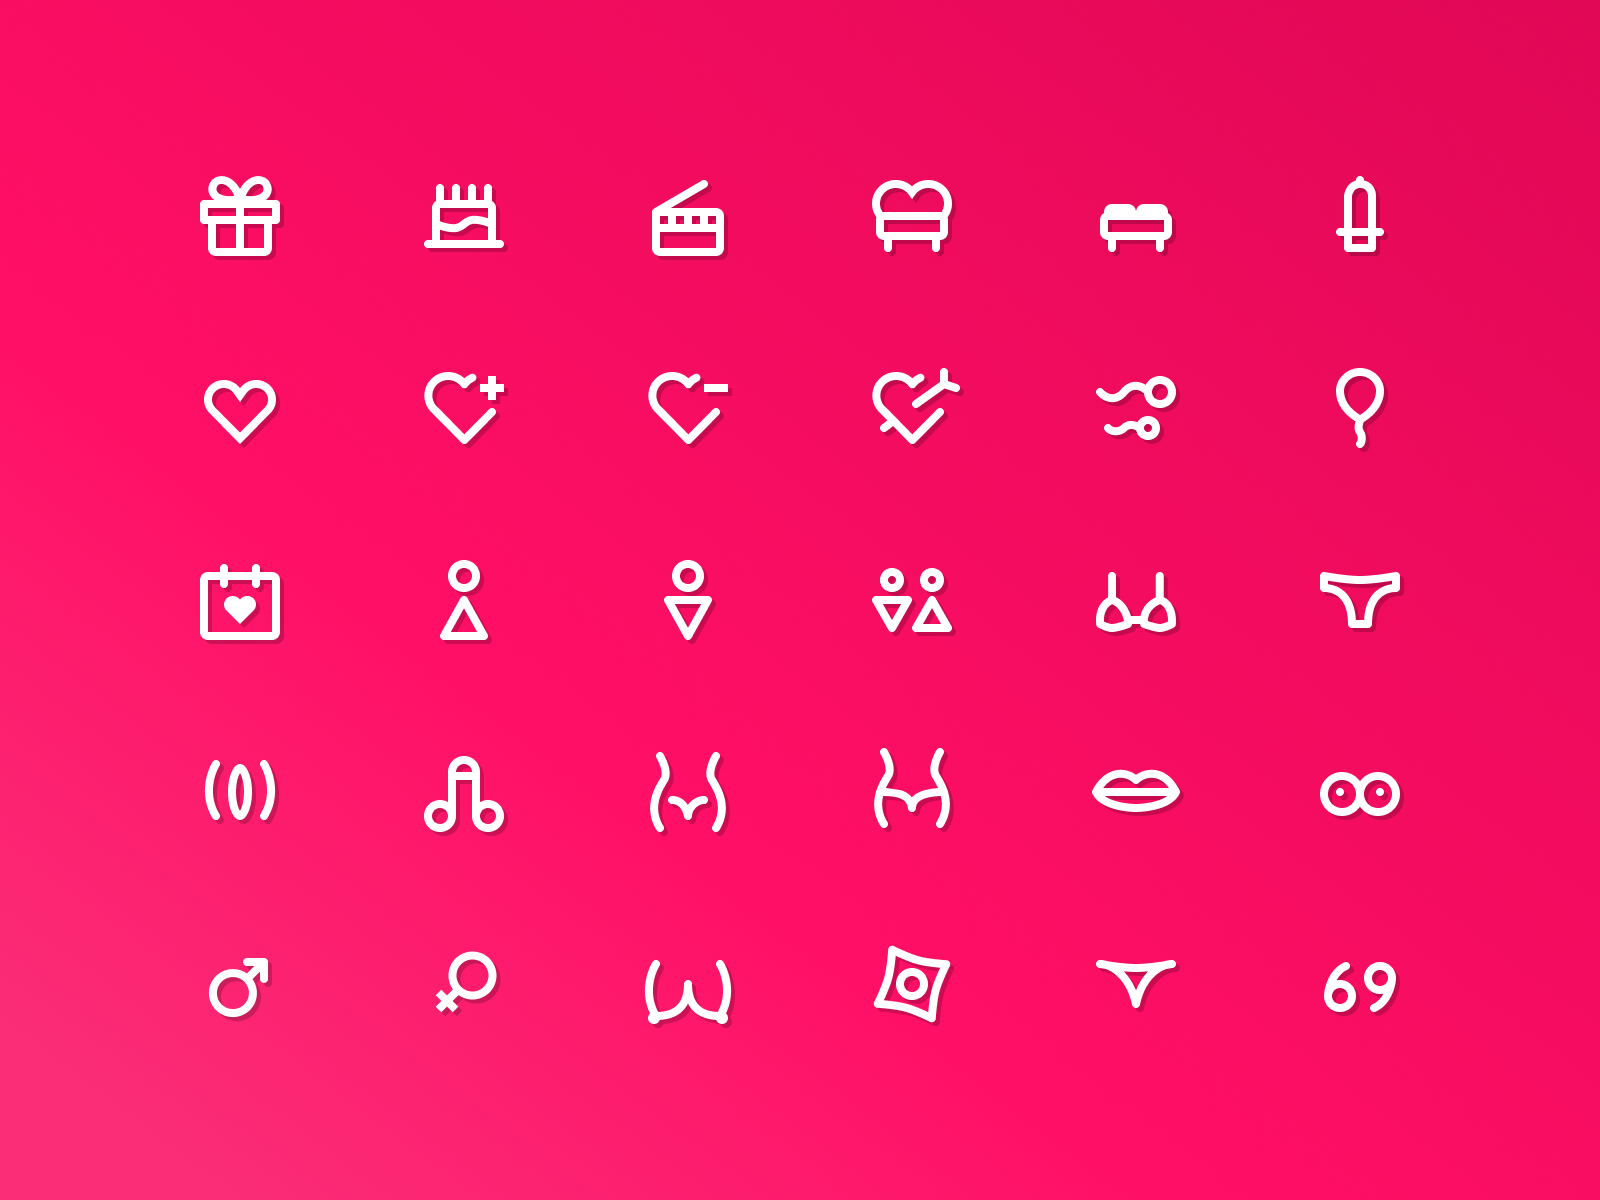 Love And Sex Icons Set By Rengised On Dribbble 3127